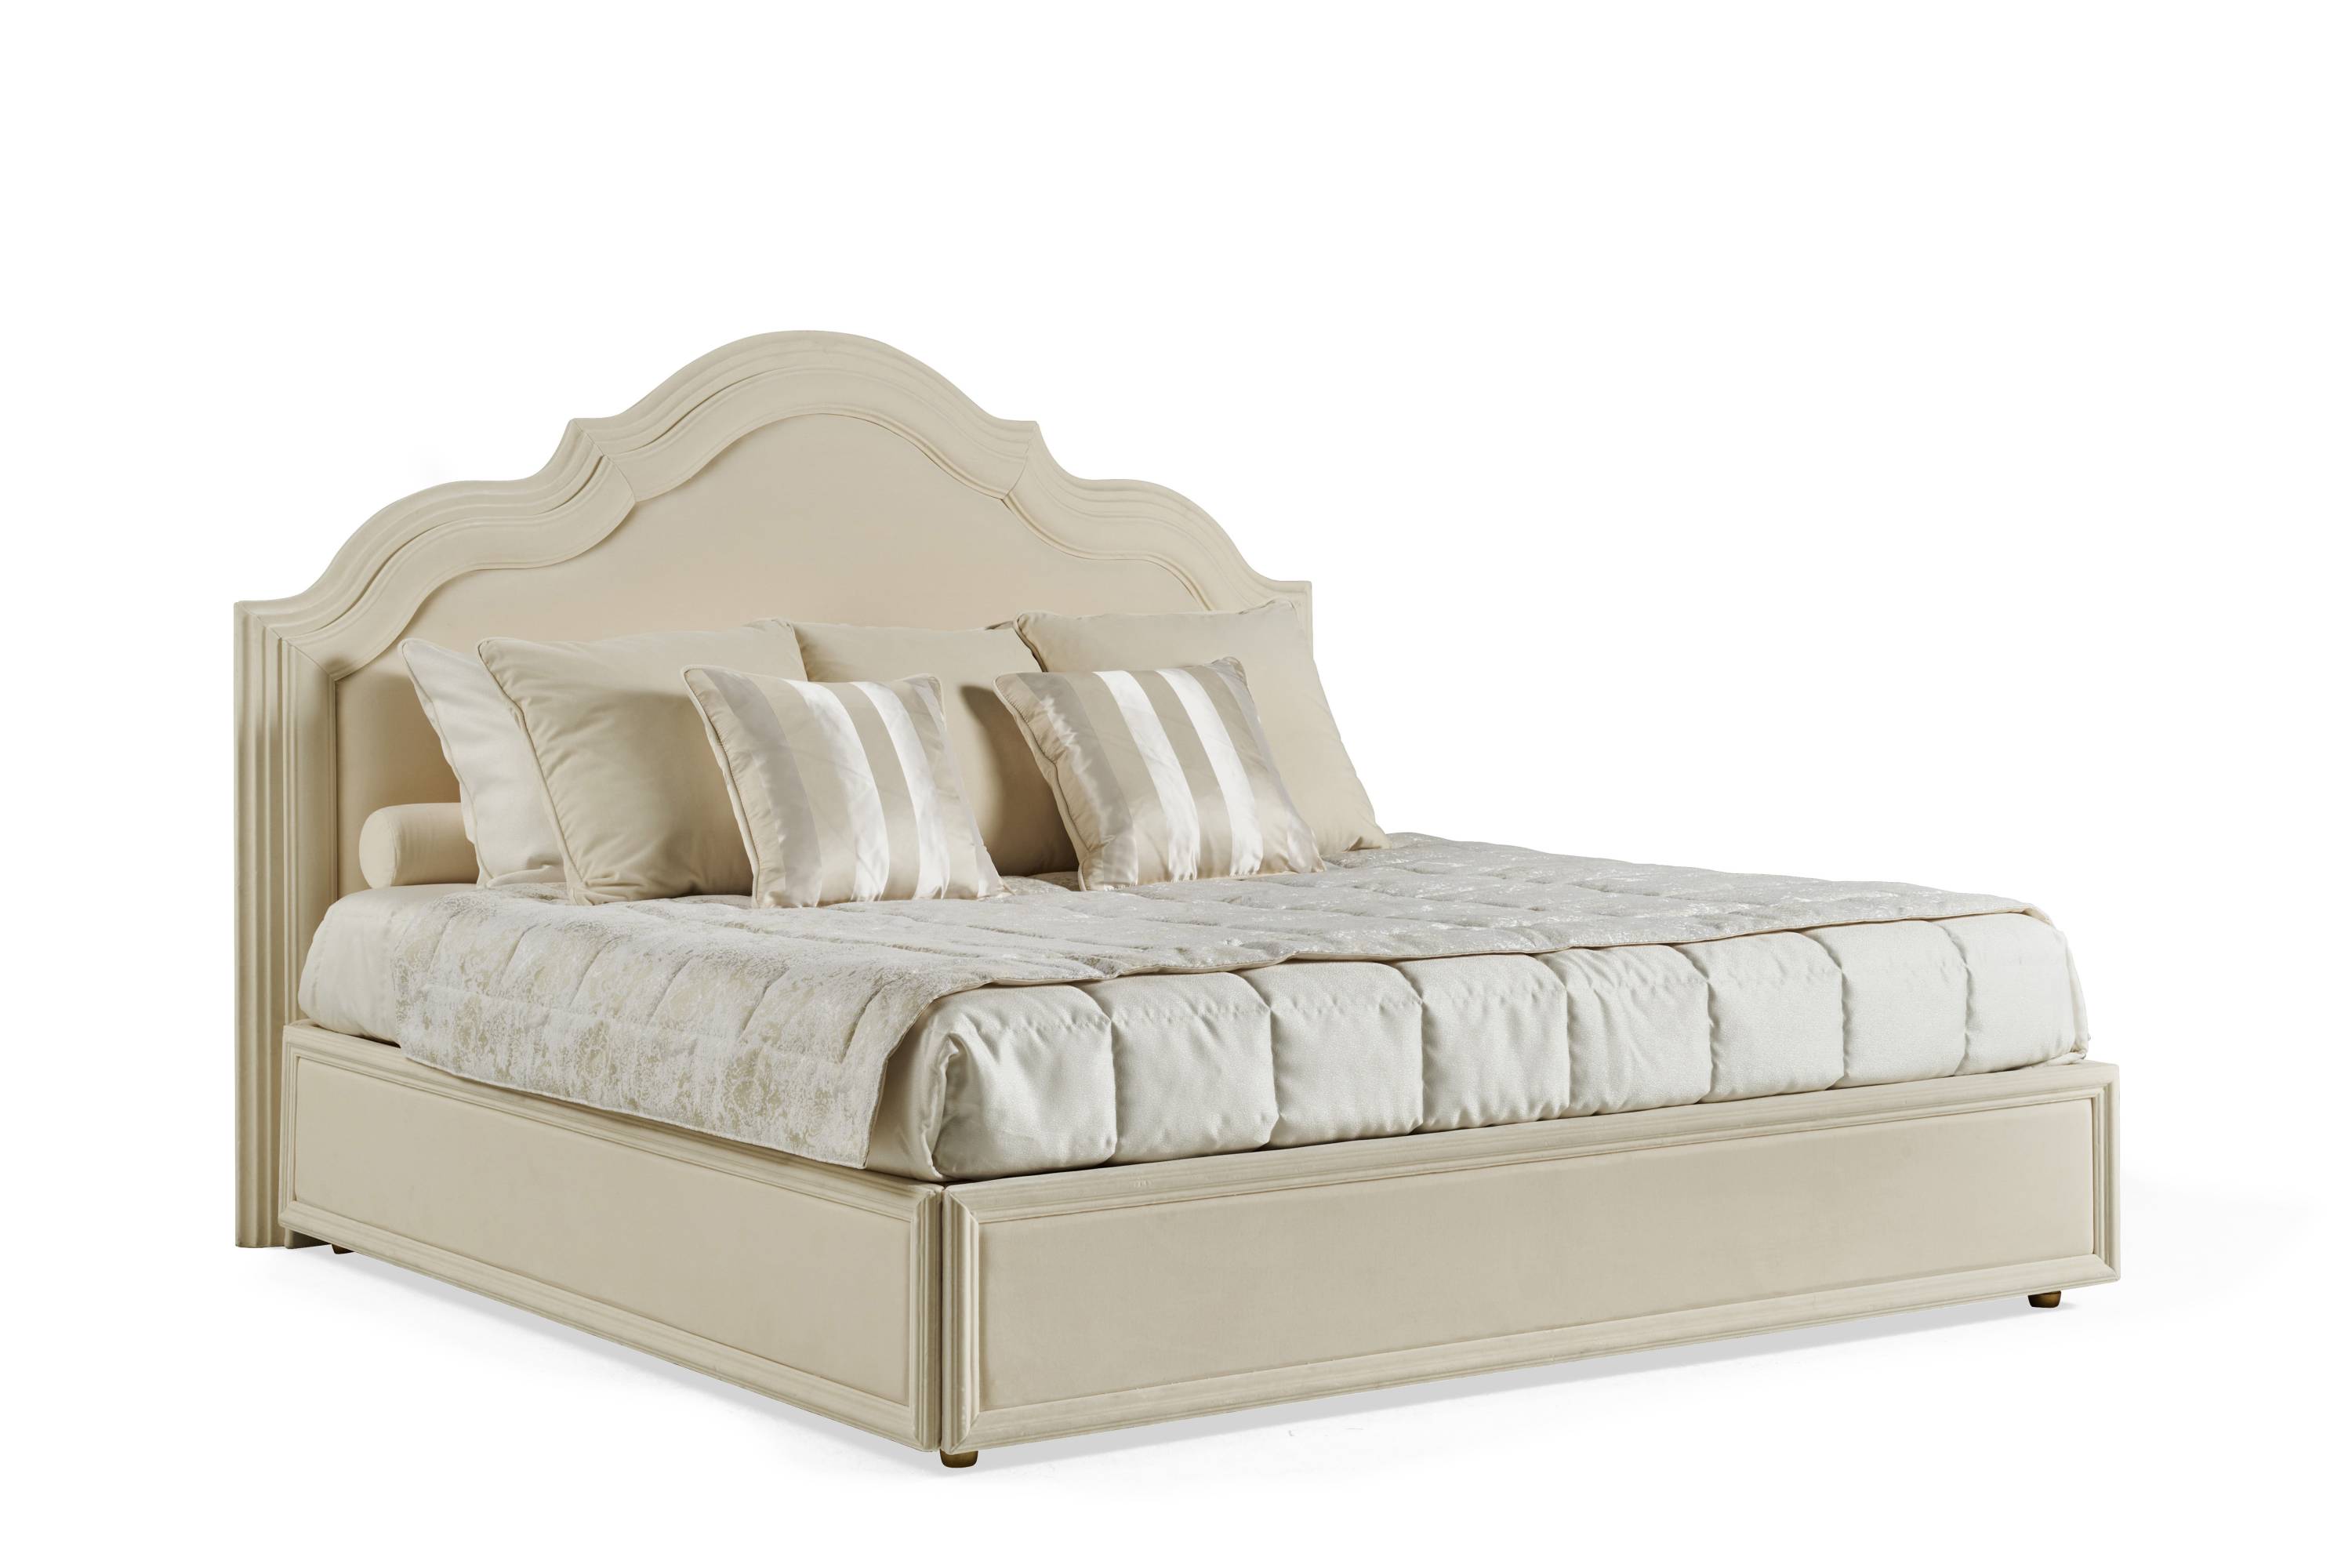 NARCISSE bed – Transform your space with luxury Made in Italy classic BEDS of Héritage collection.